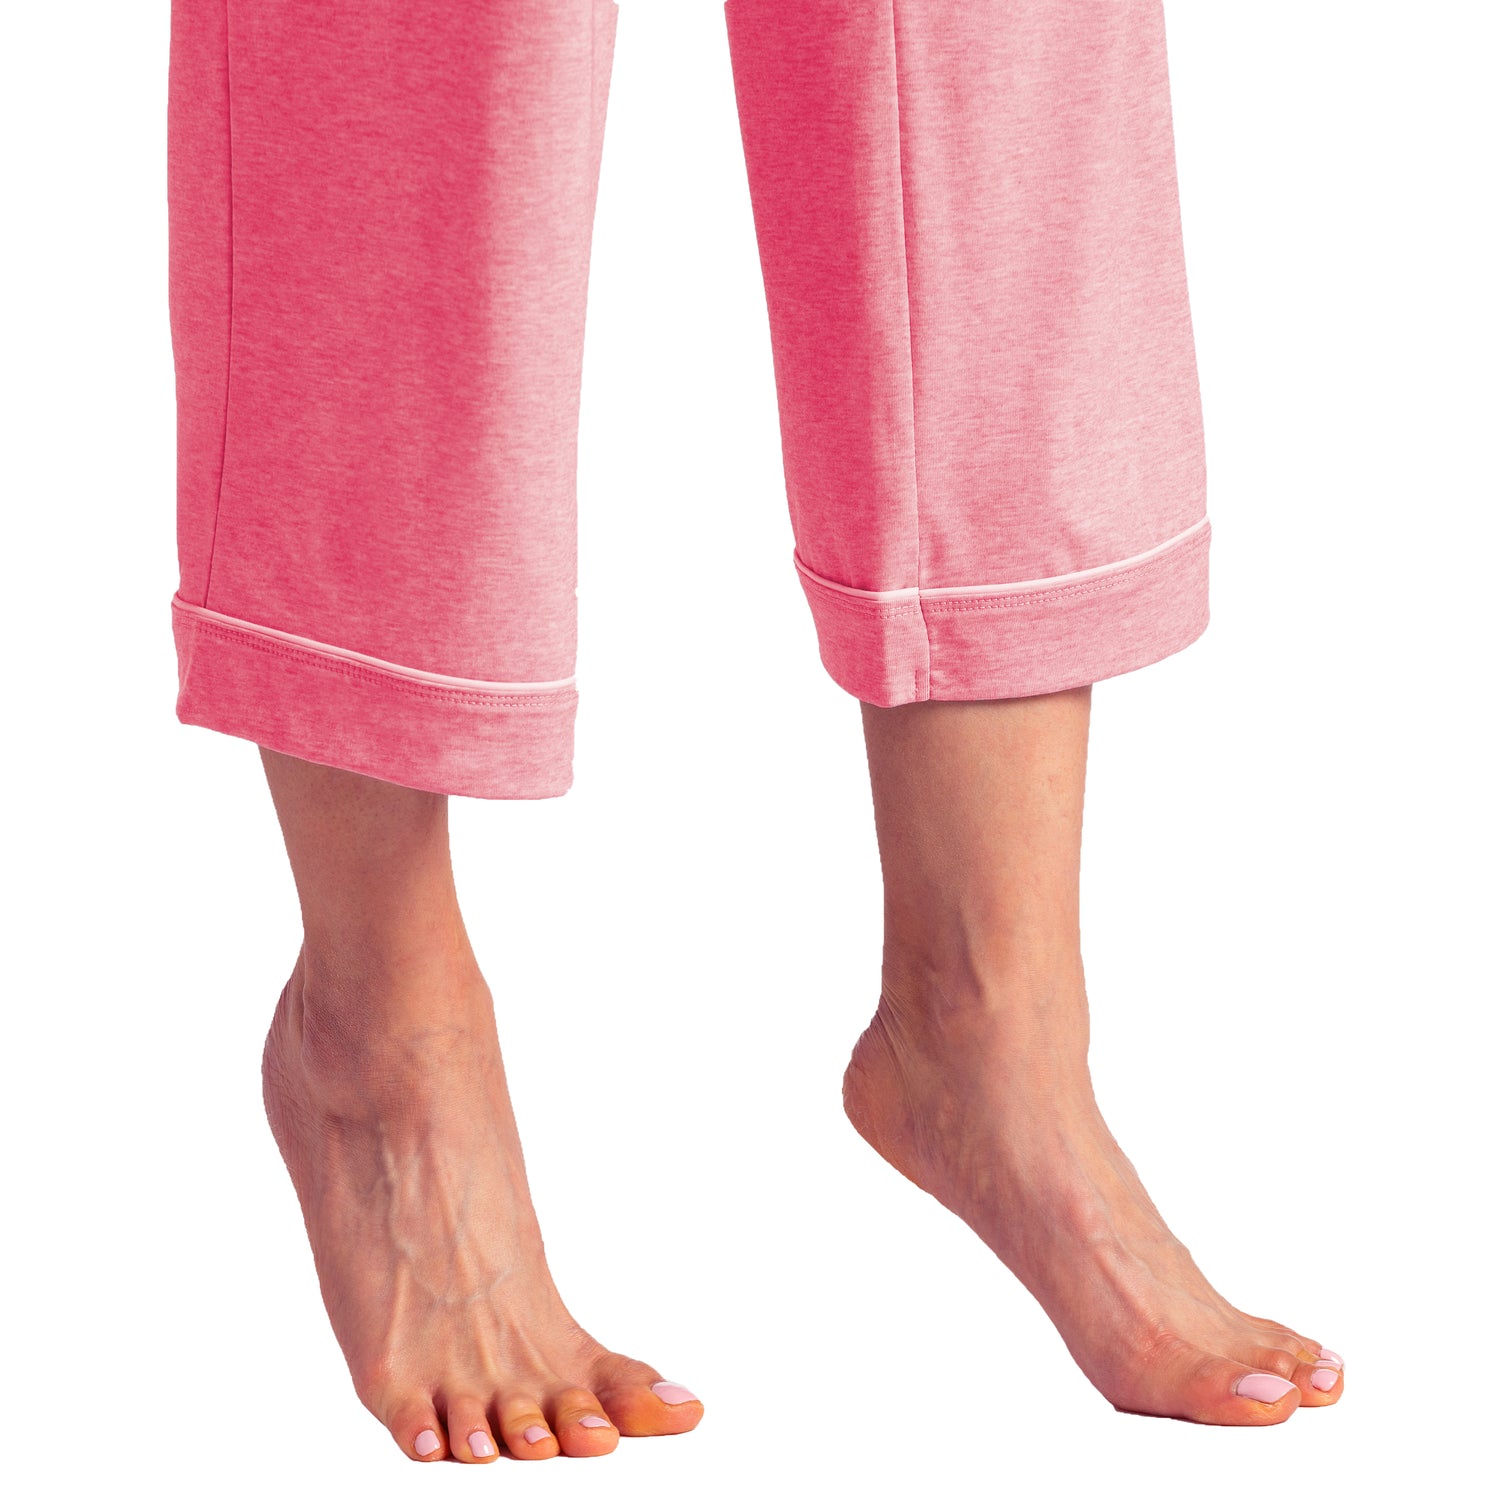 Piper - Cap Sleeve Capri-Length PJ Set with Contrast Piping Strawberry